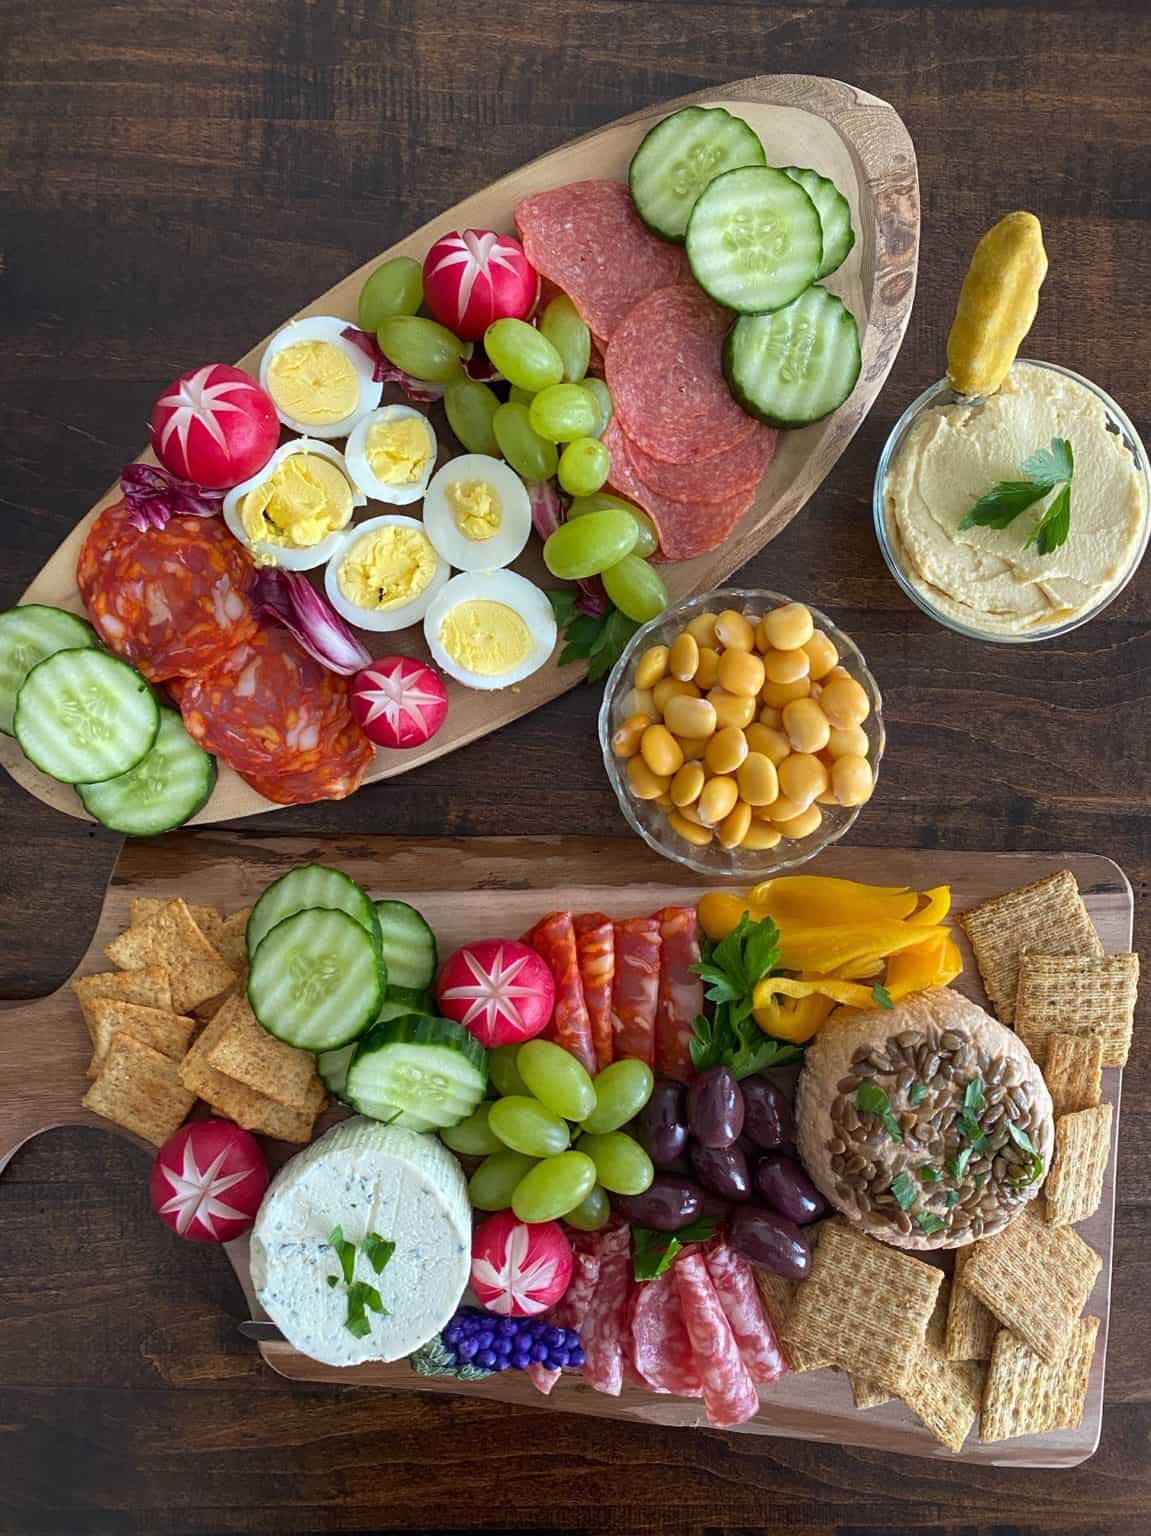 Charcuterie Definition & More! - Build the Best Boards {Dietetic ...
